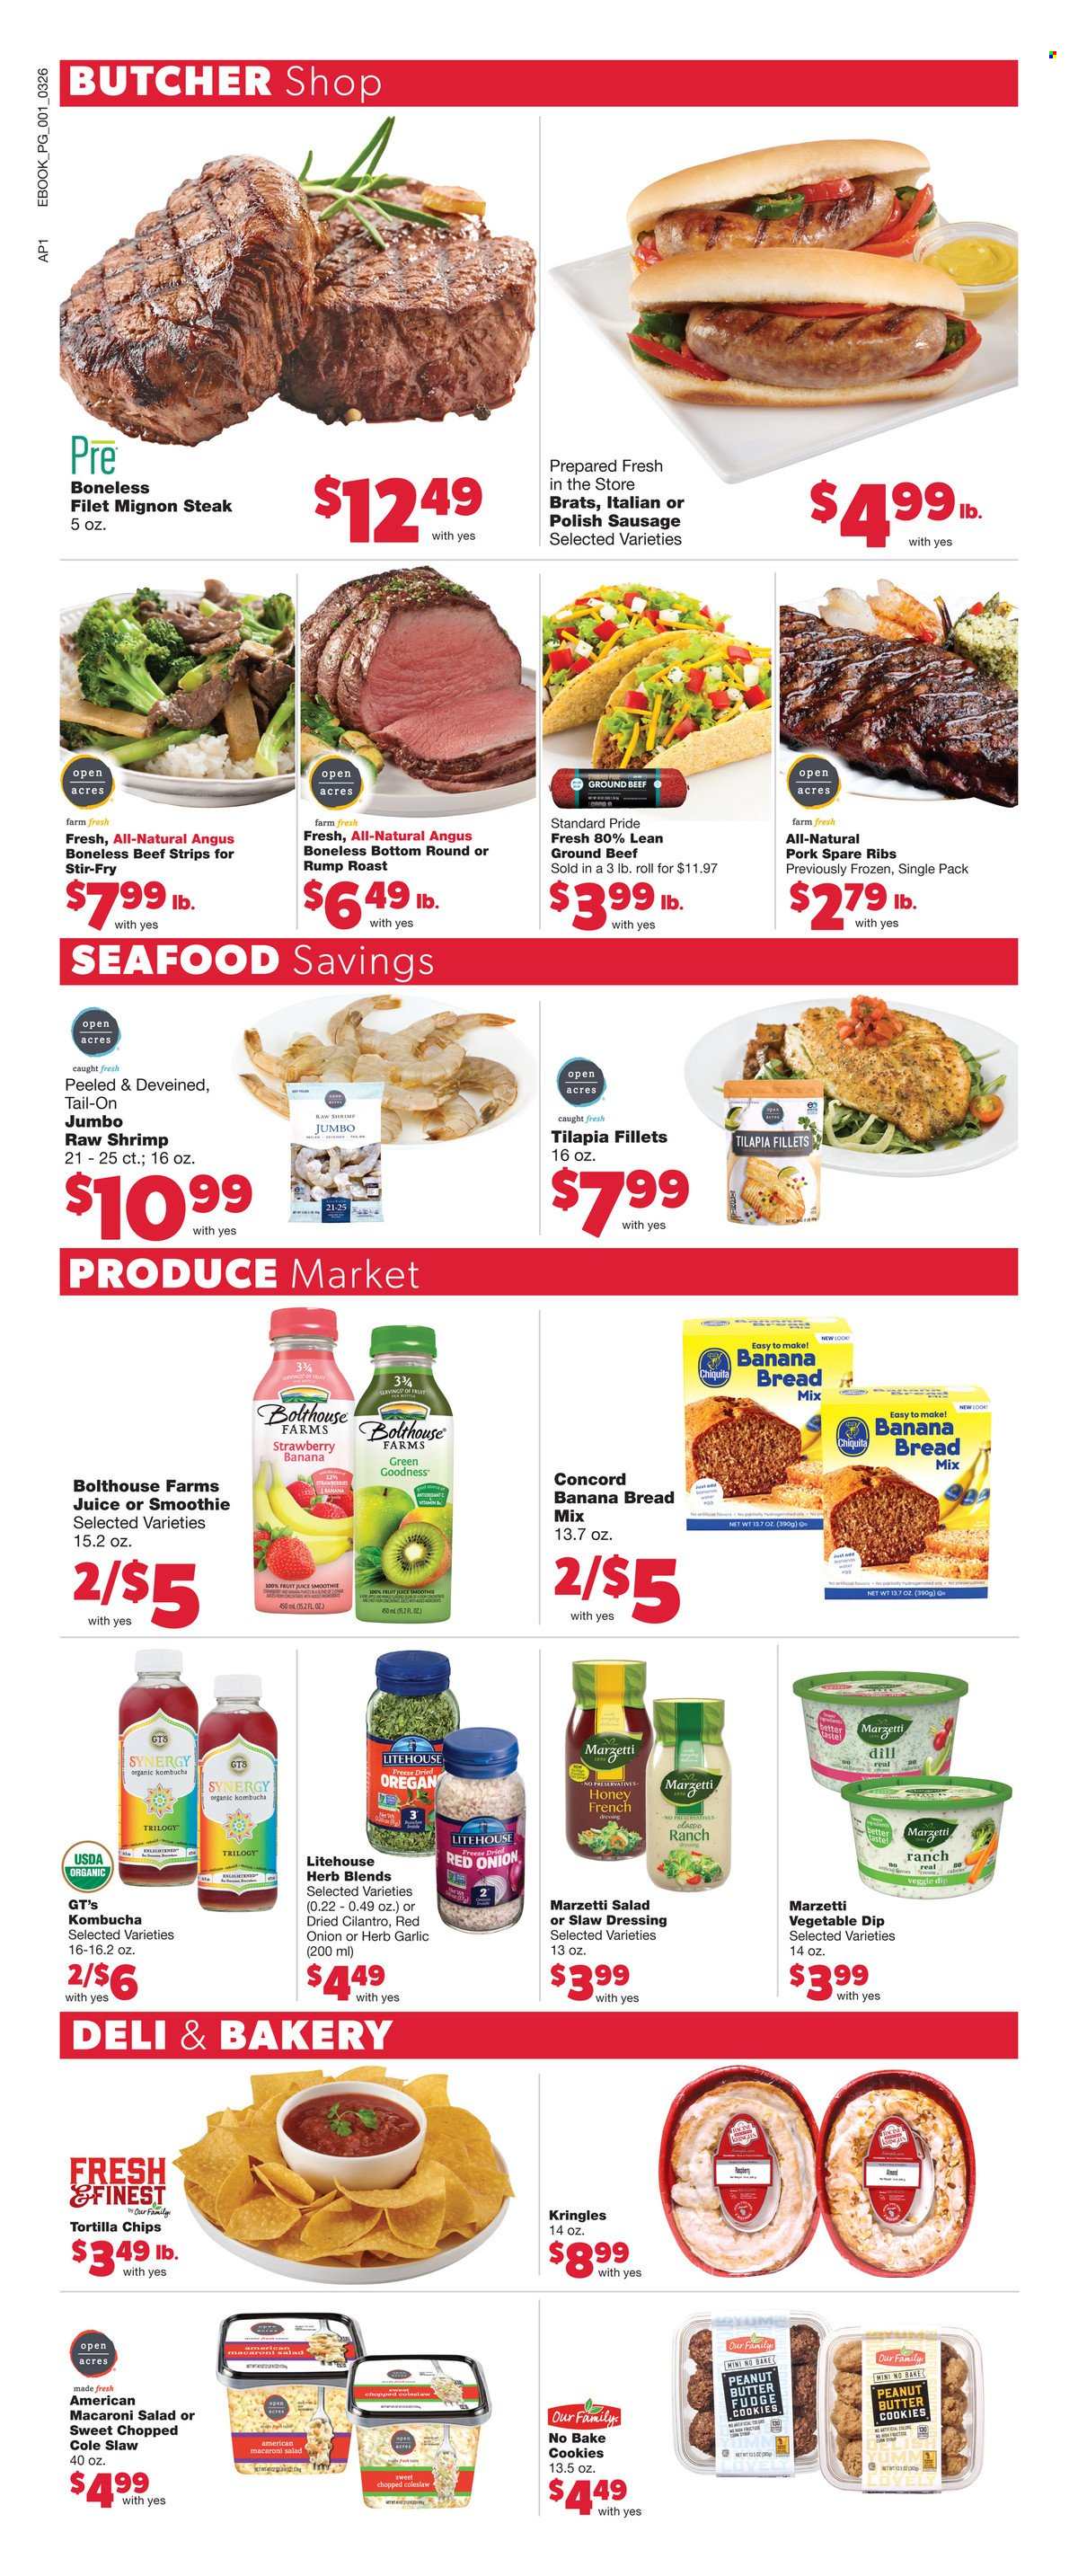 thumbnail - Family Fare Flyer - 03/26/2023 - 04/01/2023 - Sales products - bread, banana bread, garlic, onion, strawberries, tilapia, seafood, shrimps, coleslaw, roast, sausage, polish sausage, macaroni salad, dip, Enlightened lce Cream, strips, cookies, fudge, butter cookies, tortilla chips, cilantro, dill, dressing, honey, juice, fruit juice, smoothie, kombucha, beef meat, ground beef, steak, beef tenderloin, ribs, pork meat, pork ribs, pork spare ribs. Page 7.